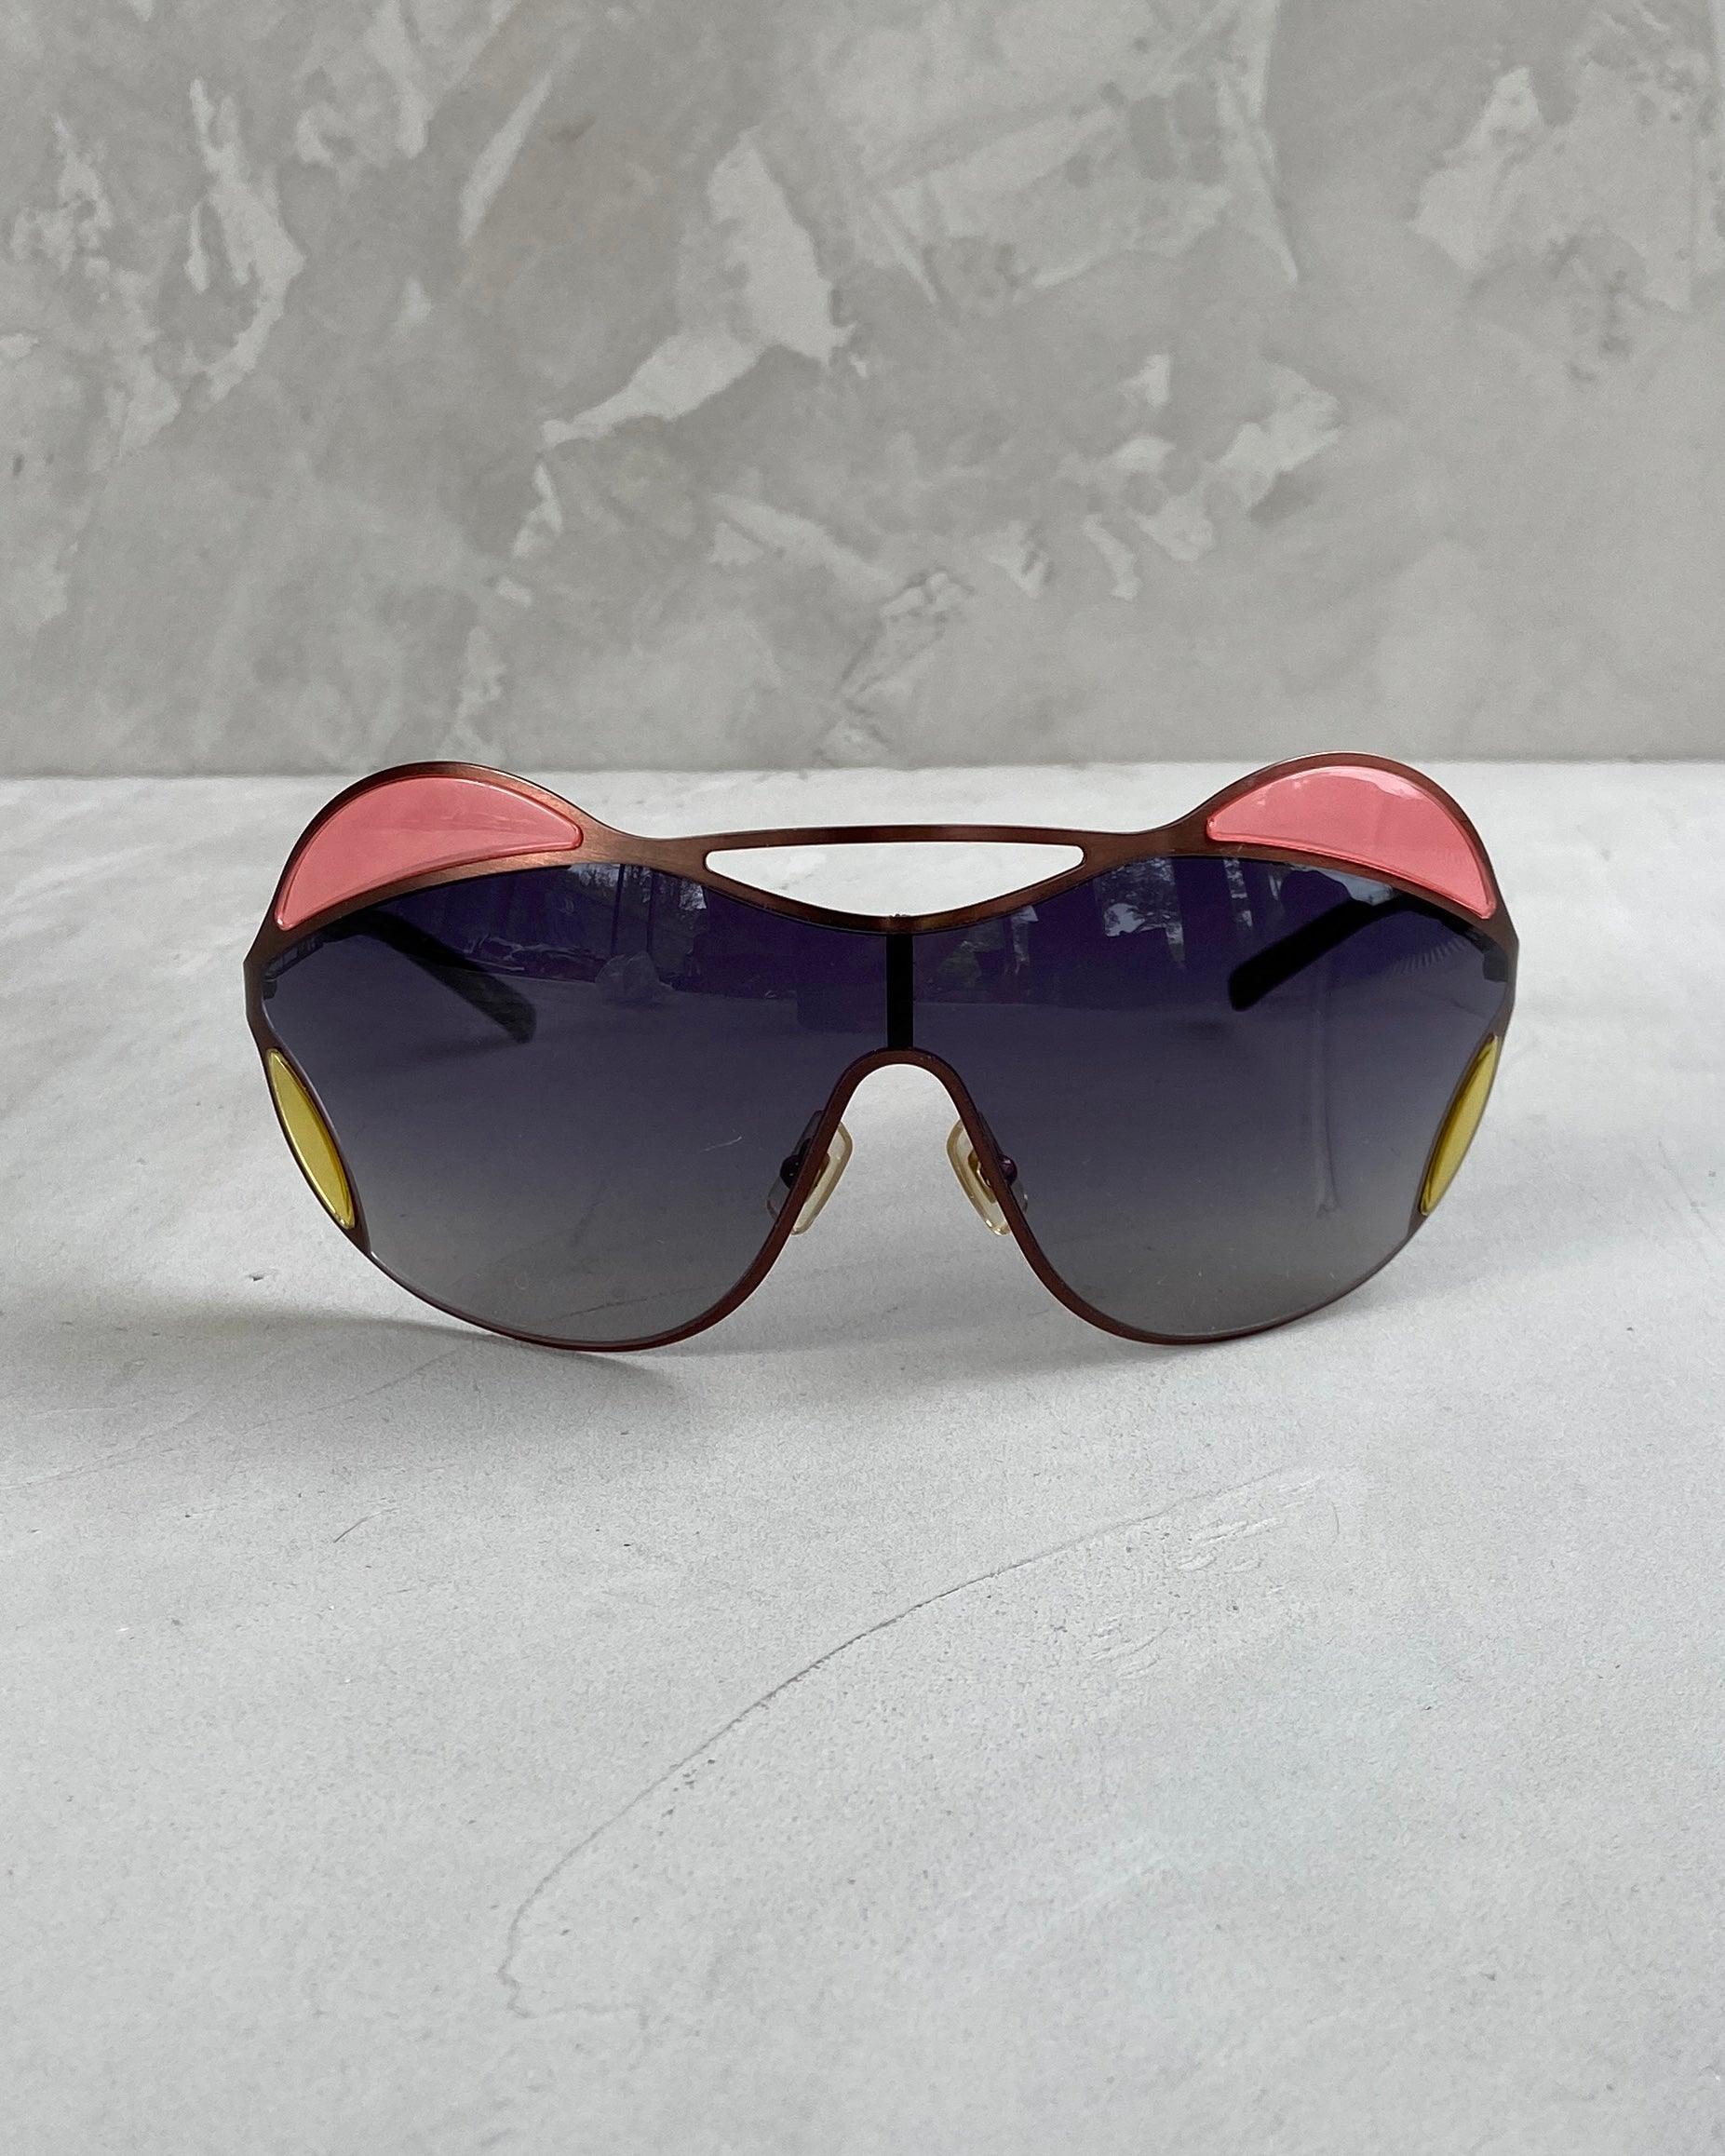 MIU MIU SS2008 STAINED GLASS SUNGLASSES - Known Source